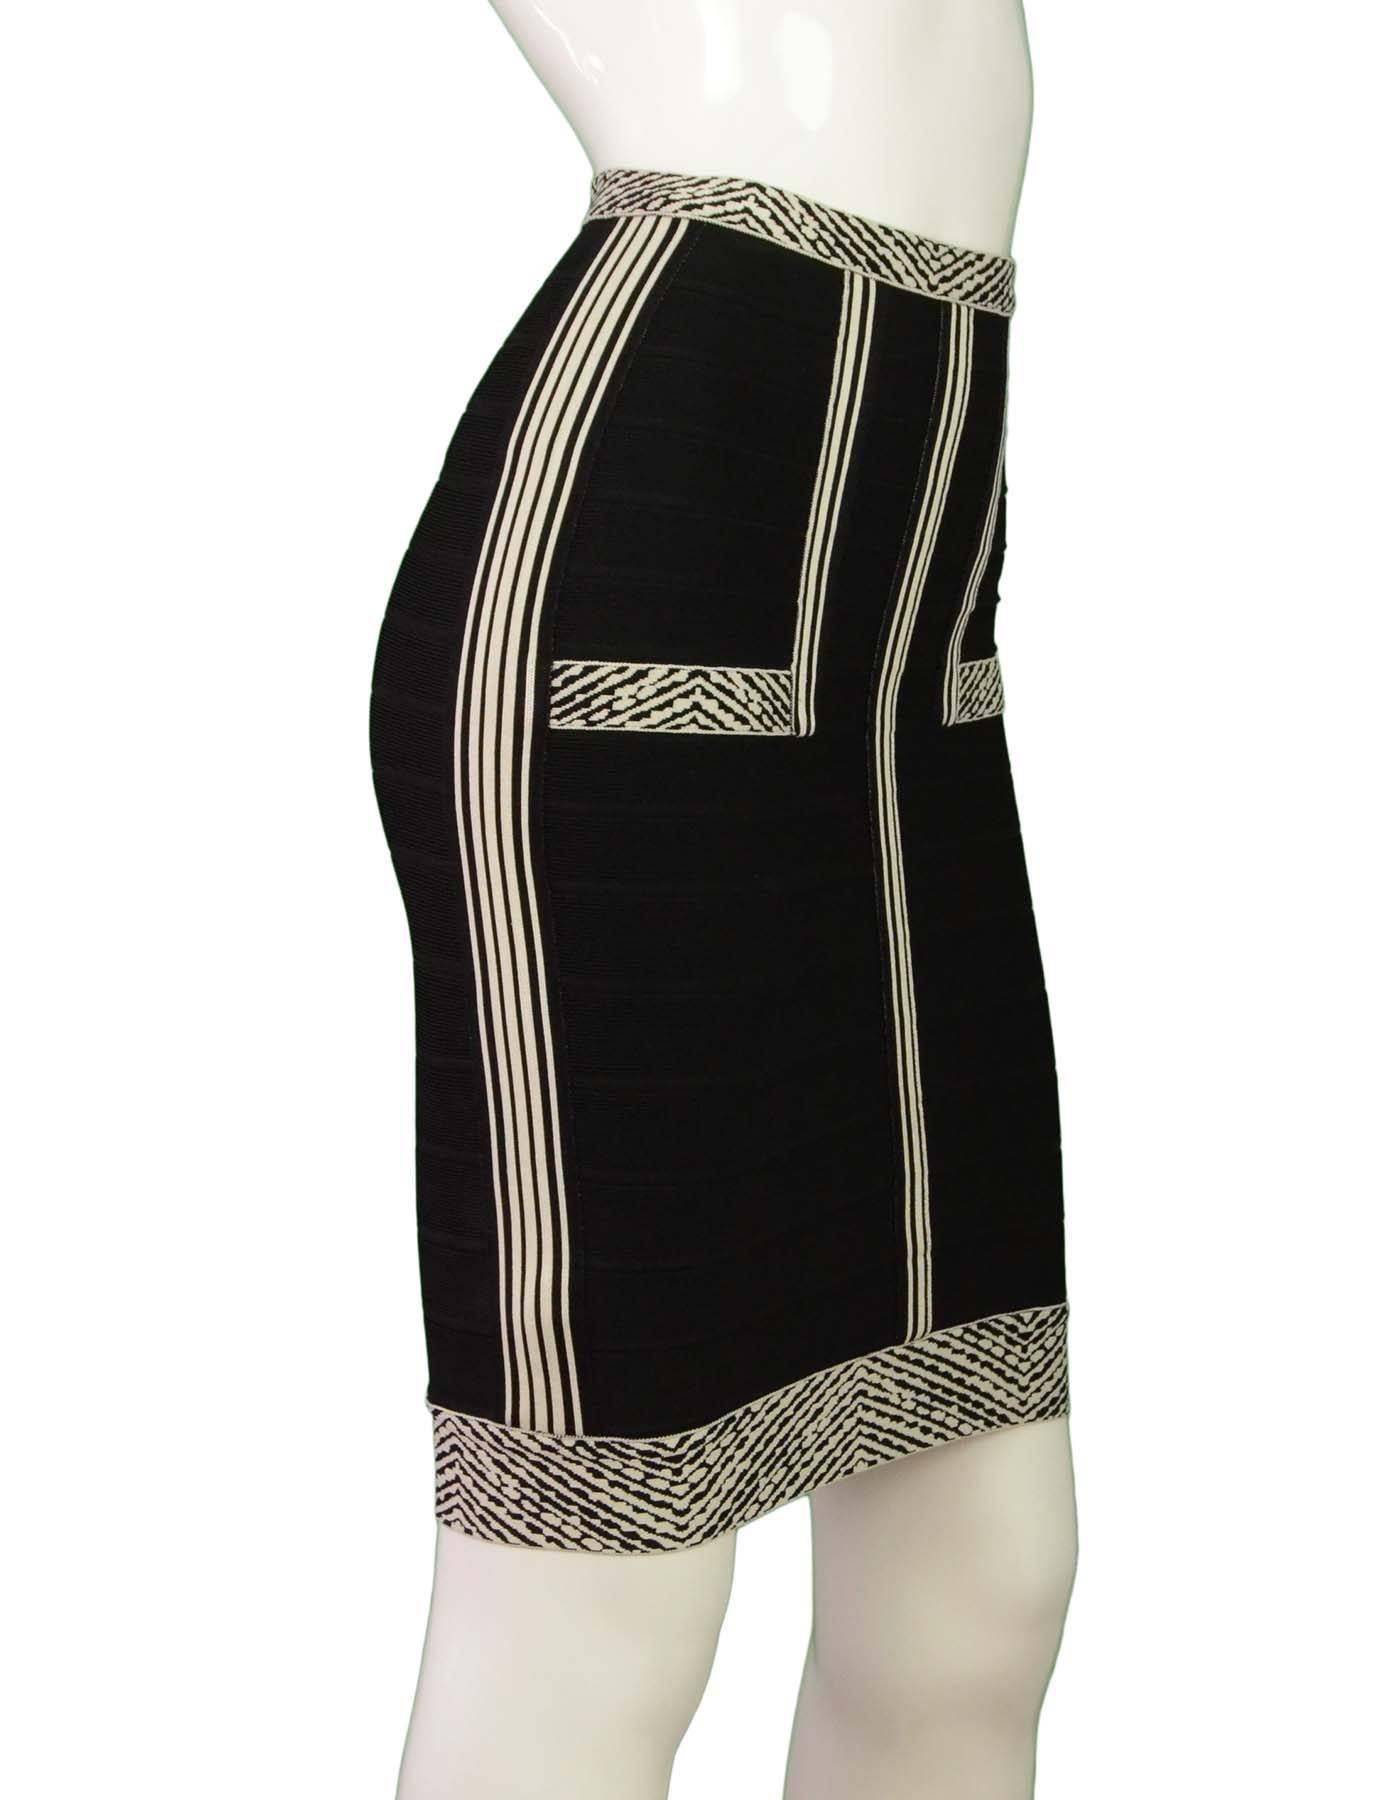 Herve Leger Black and White Bandage Skirt sz XS

Made In: China
Color: Black and white
Composition: 90% Rayon, 9% Nylon, 1% Spandex 
Lining: None
Closure/Opening: Pull-up
Exterior Pockets: None
Interior Pockets: None
Retail Price: $880 +